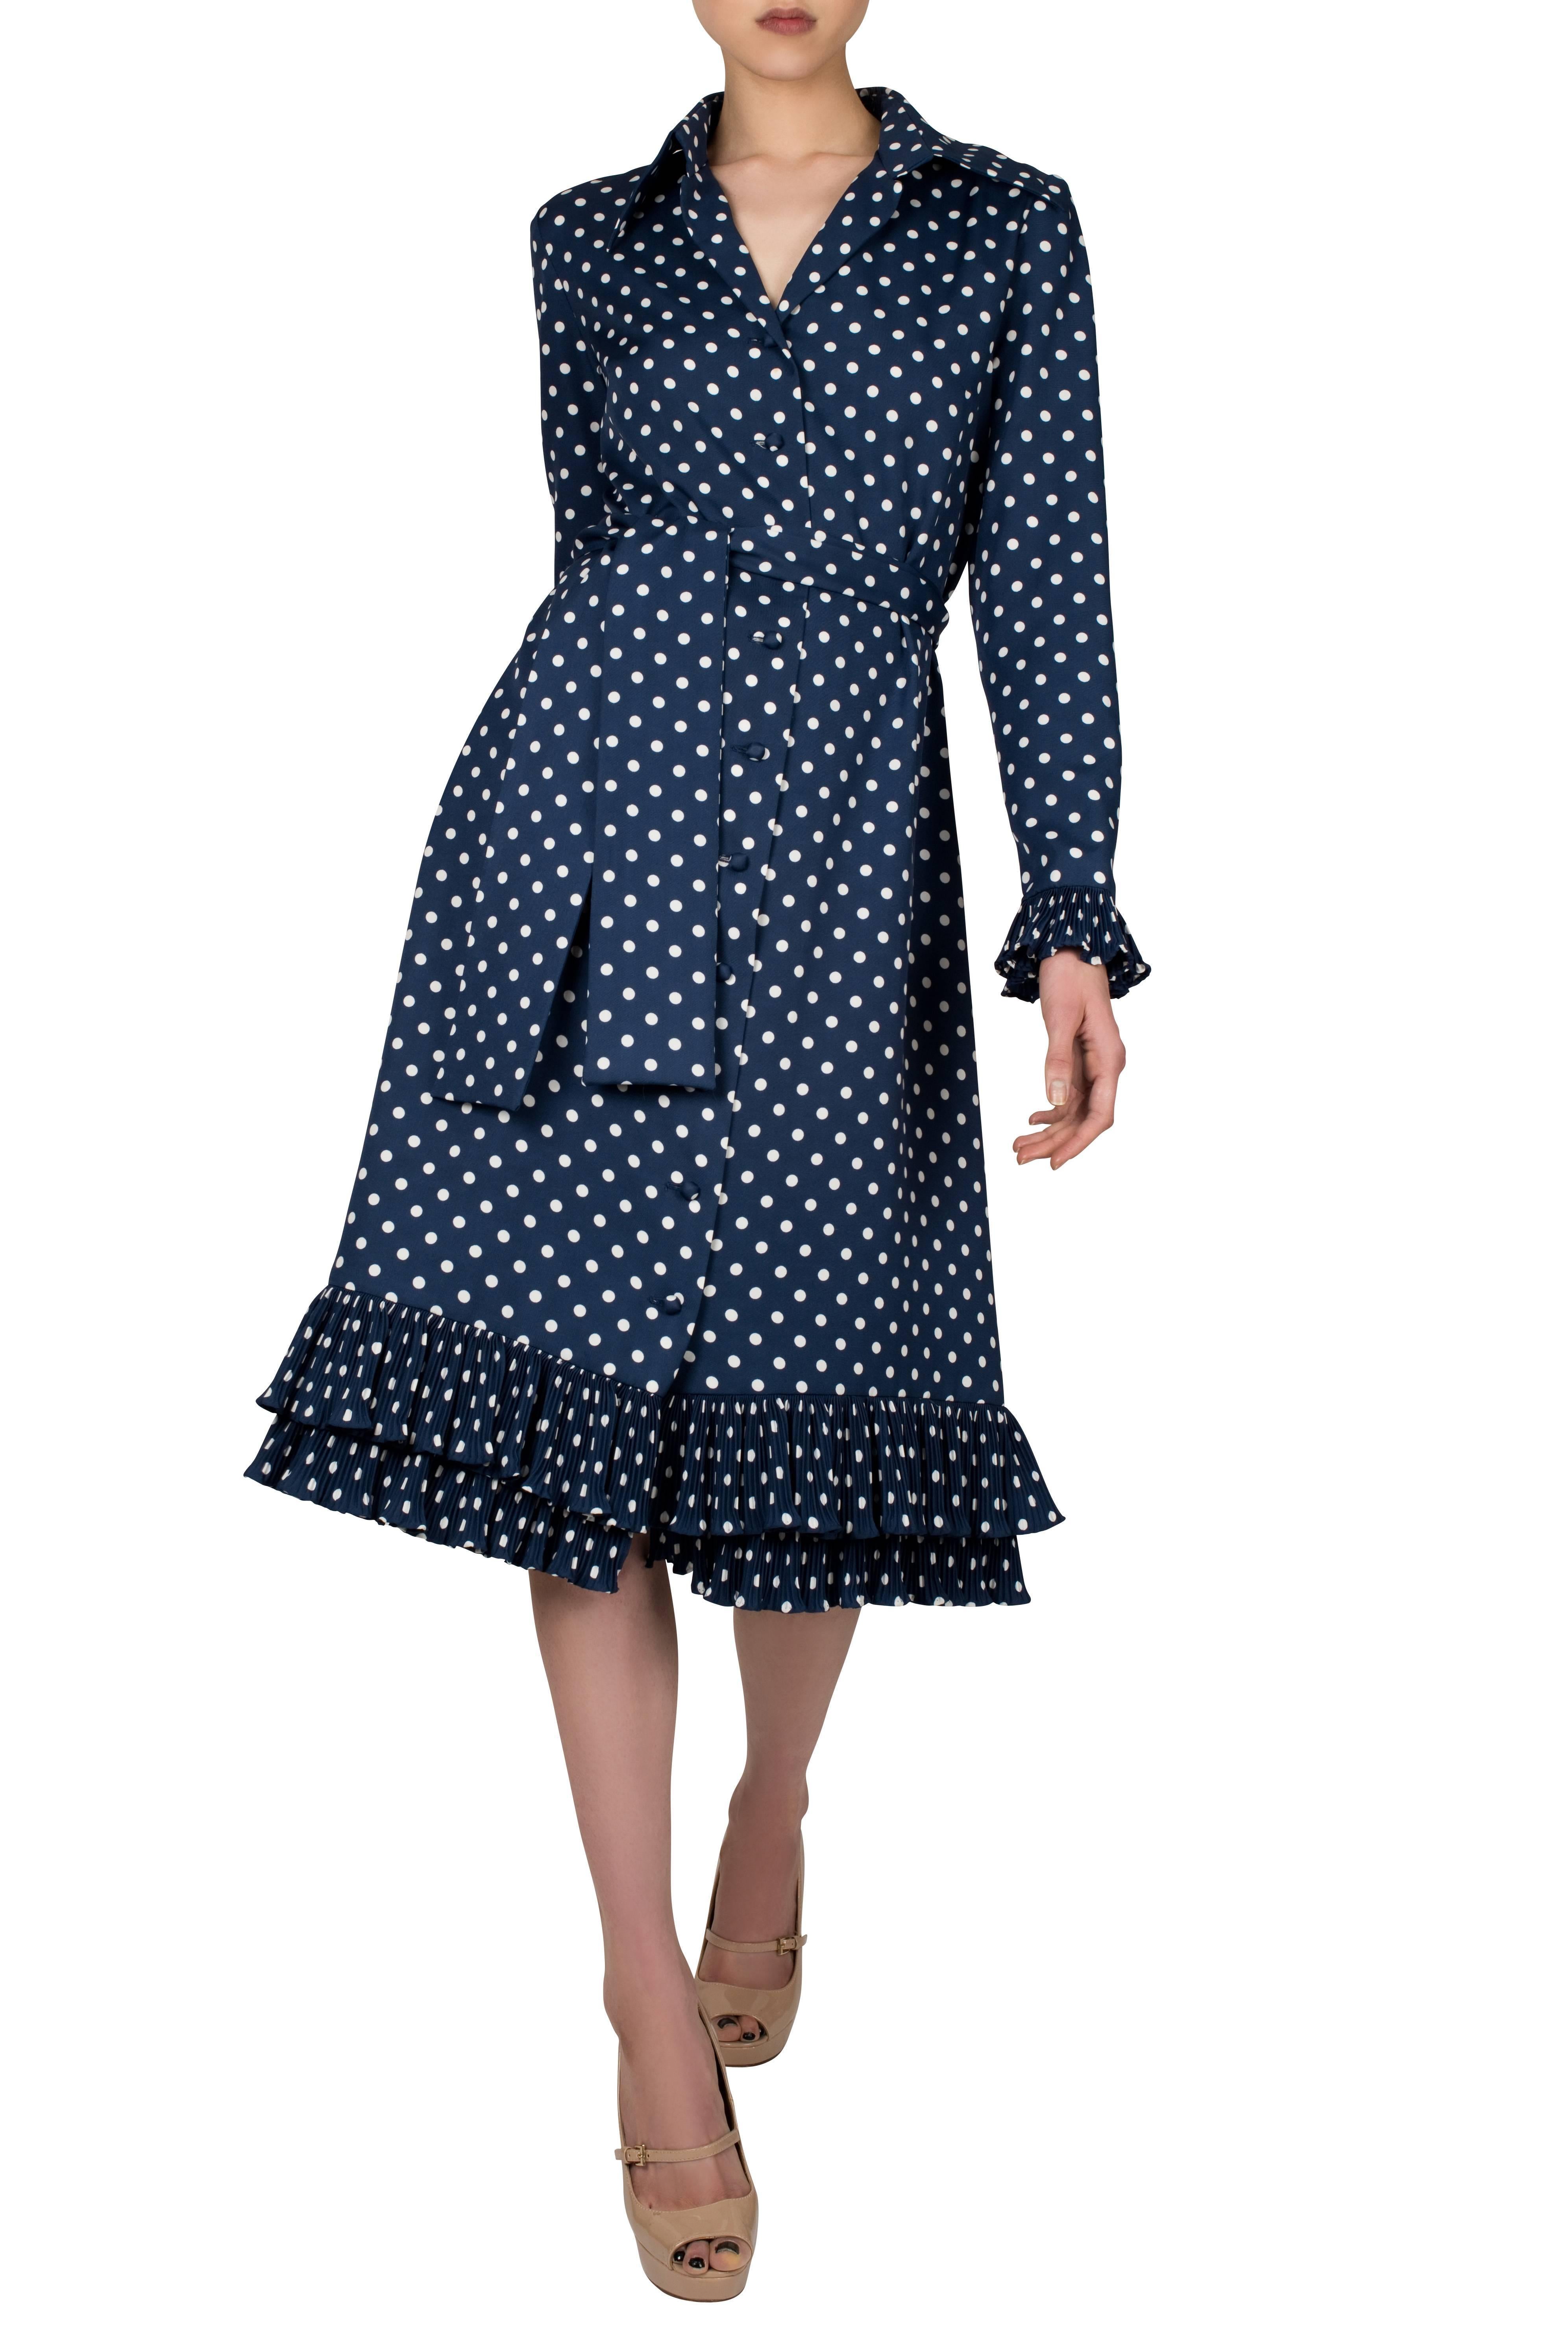 Beautiful 1970's Victor Costa shirt dress. Made from a soft synthetic fabric in navy blue with white polka dots, the dress is buttoned down in the front with micro pleats embellishing the cuffs and hem. An additional feature to the dress is a wide